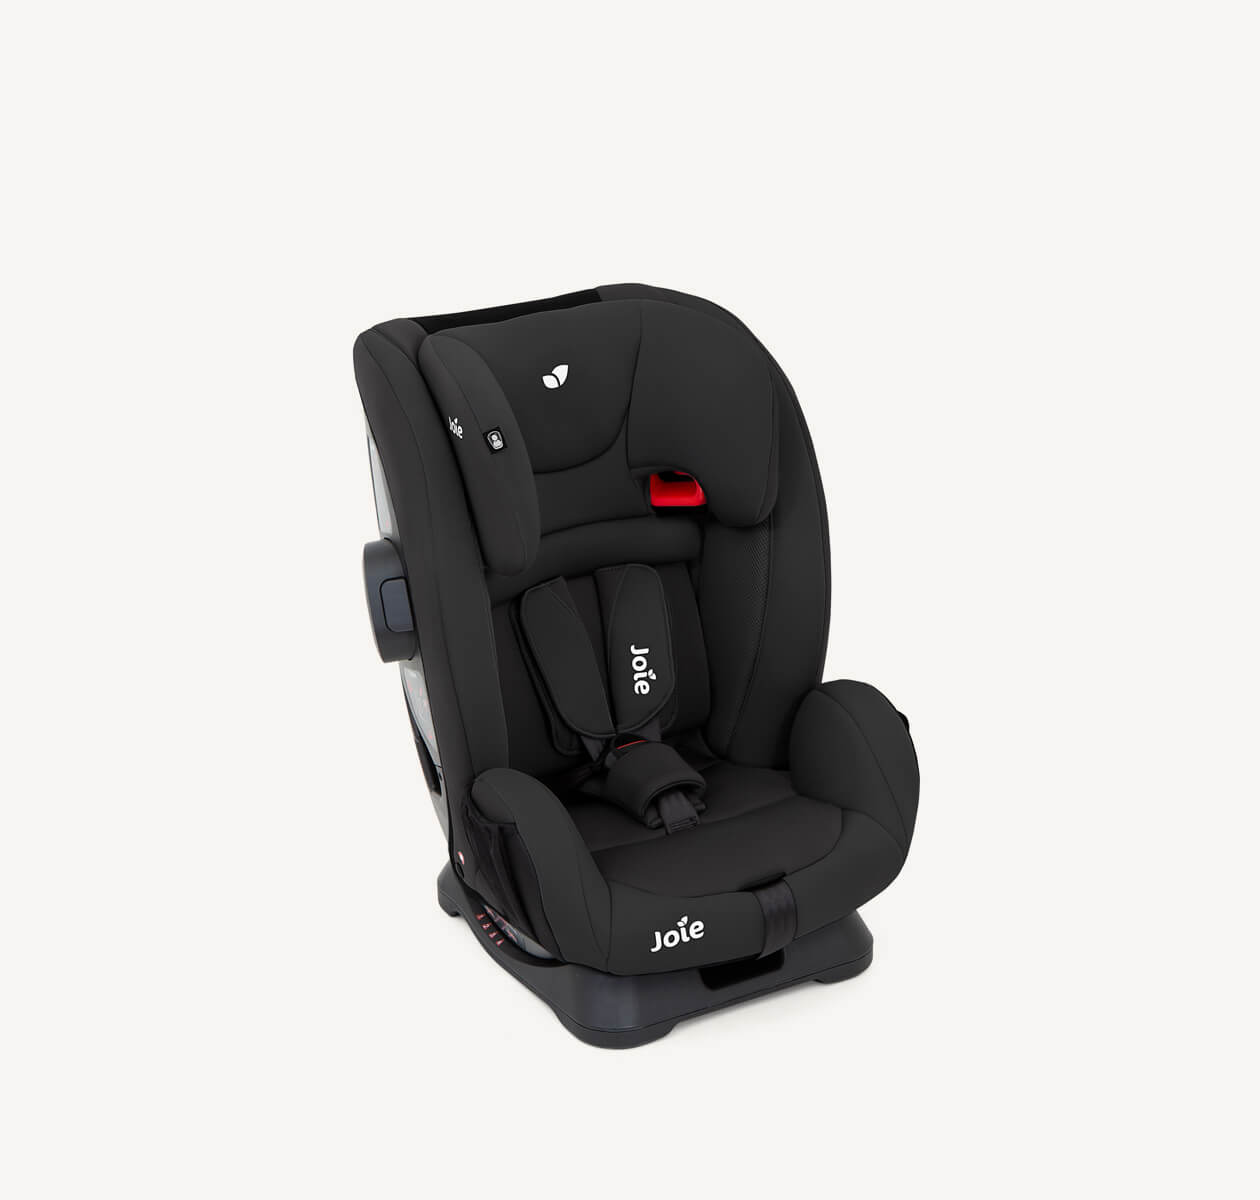  Joie fortifi child car seat in black facing at a right angle with the headrest fully lowered.